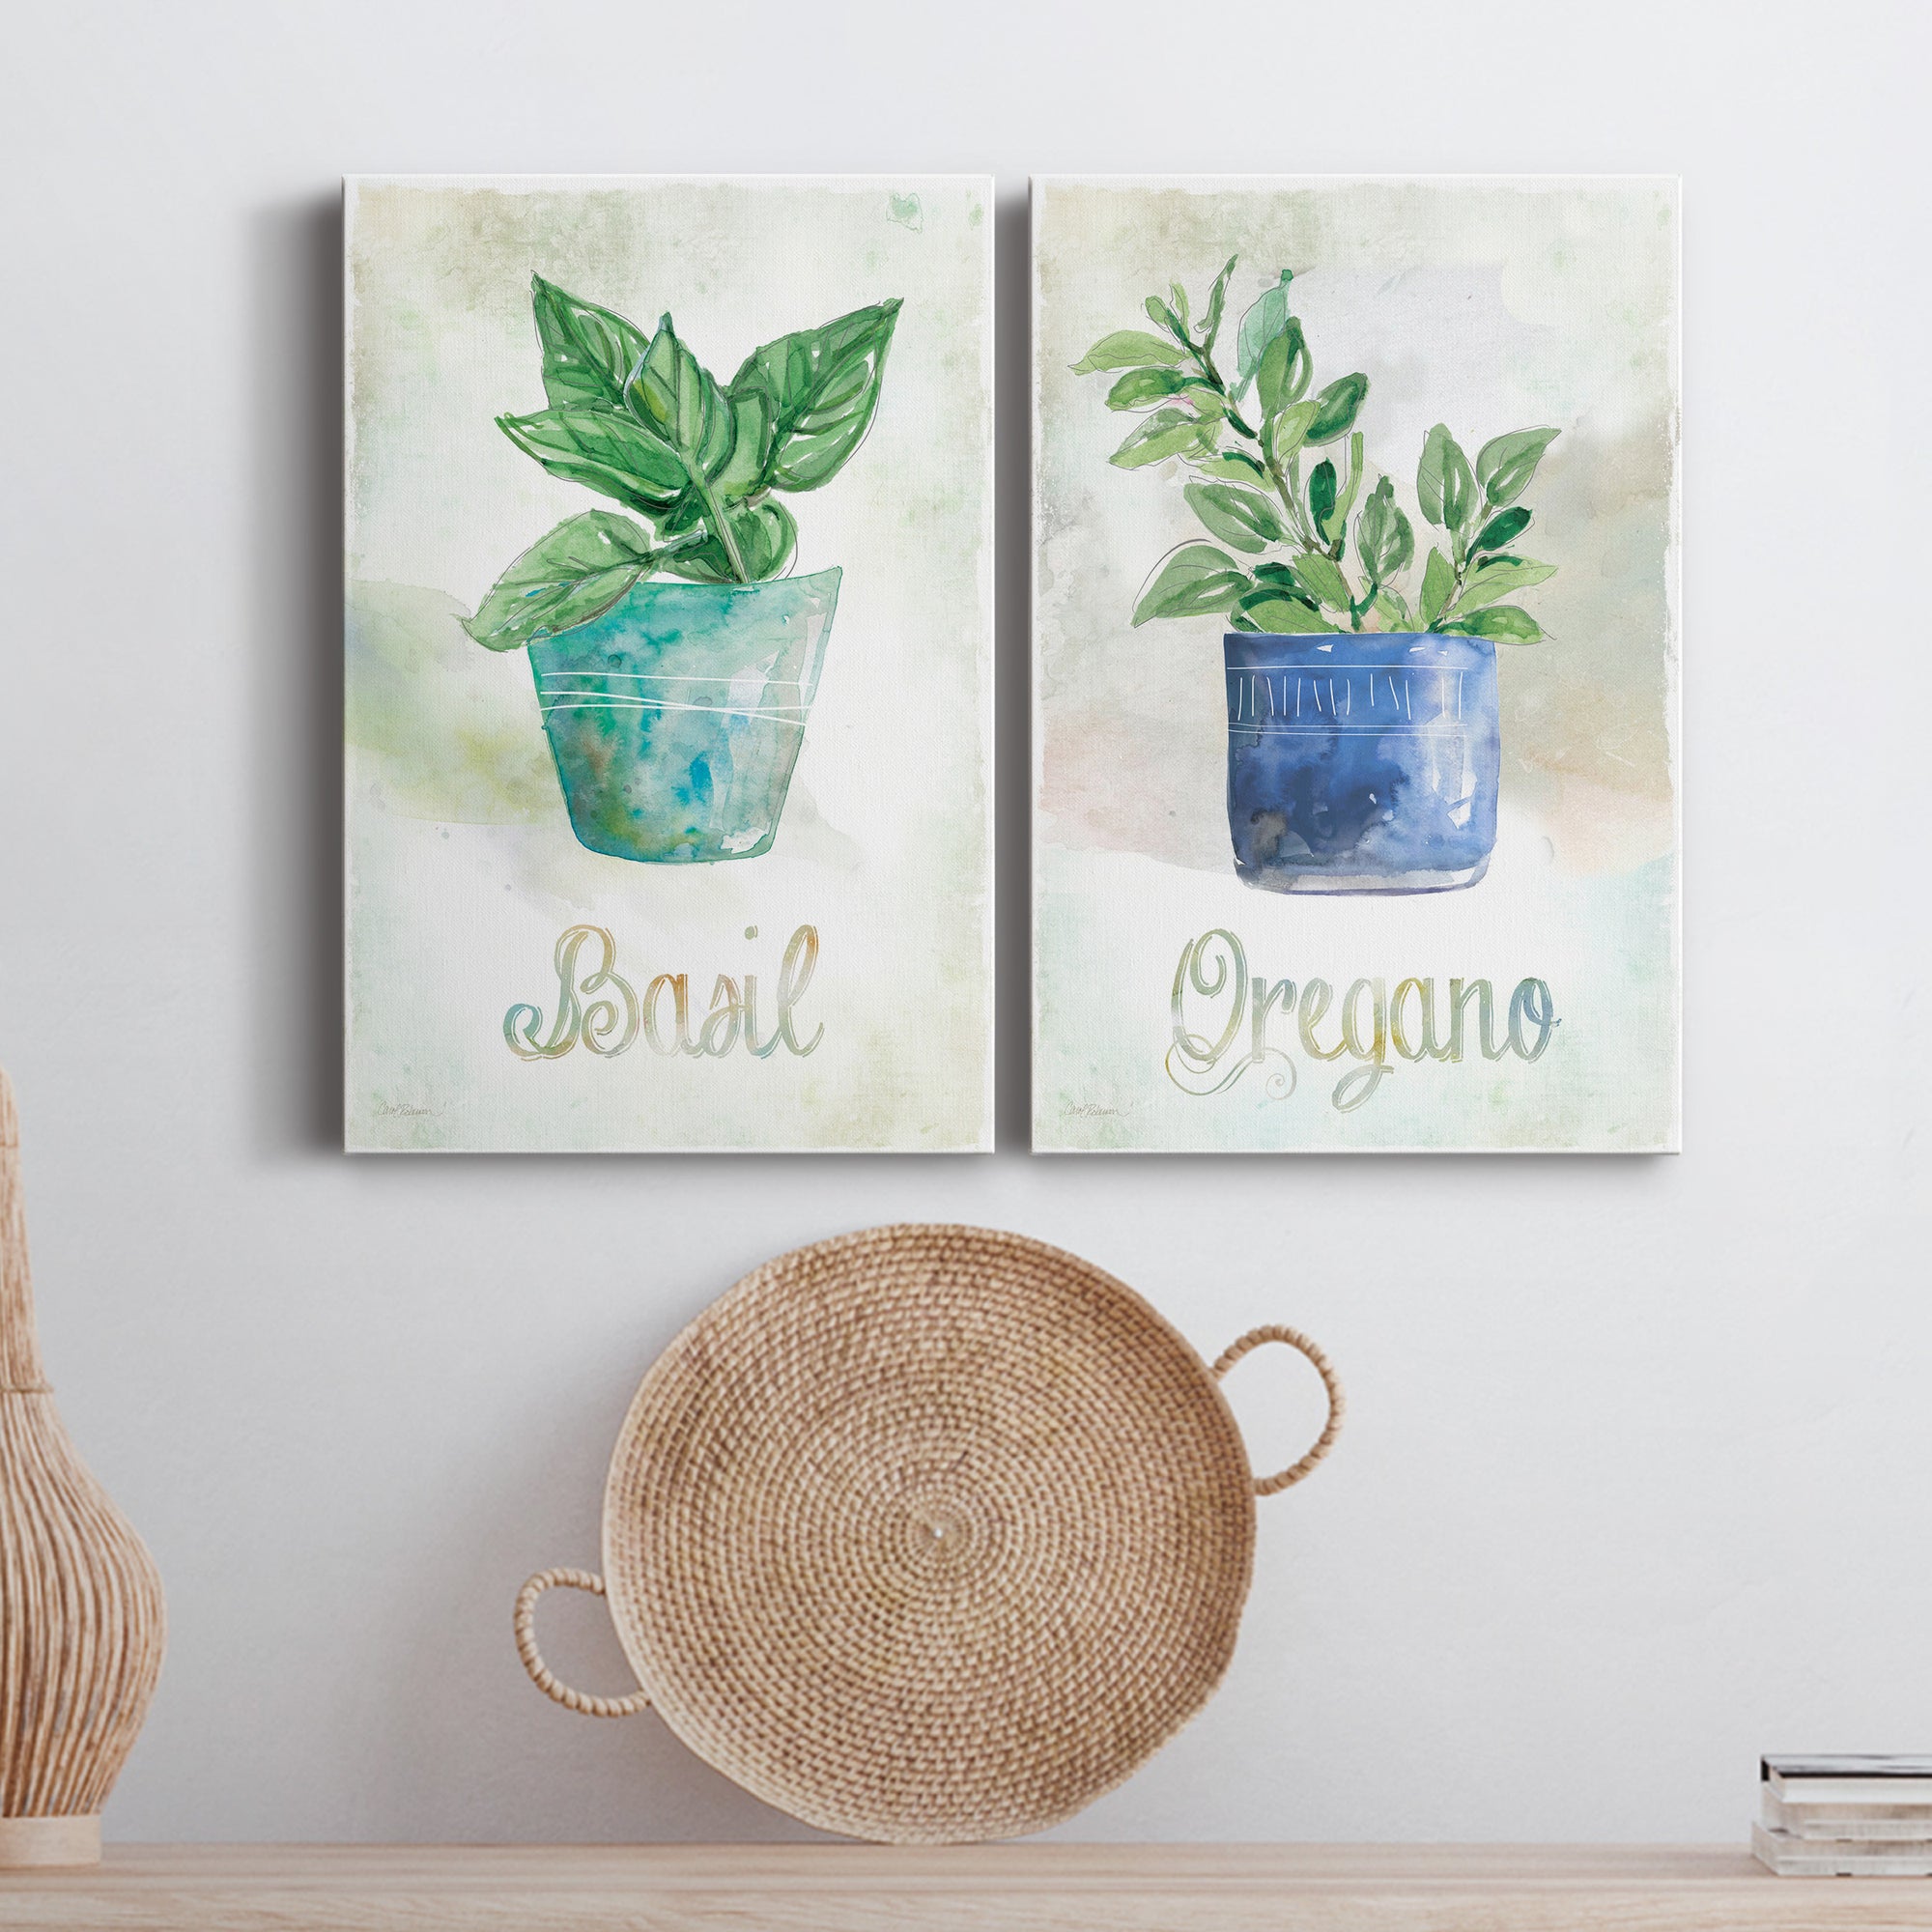 Potted Basil Premium Gallery Wrapped Canvas - Ready to Hang - Set of 2 - 8 x 12 Each